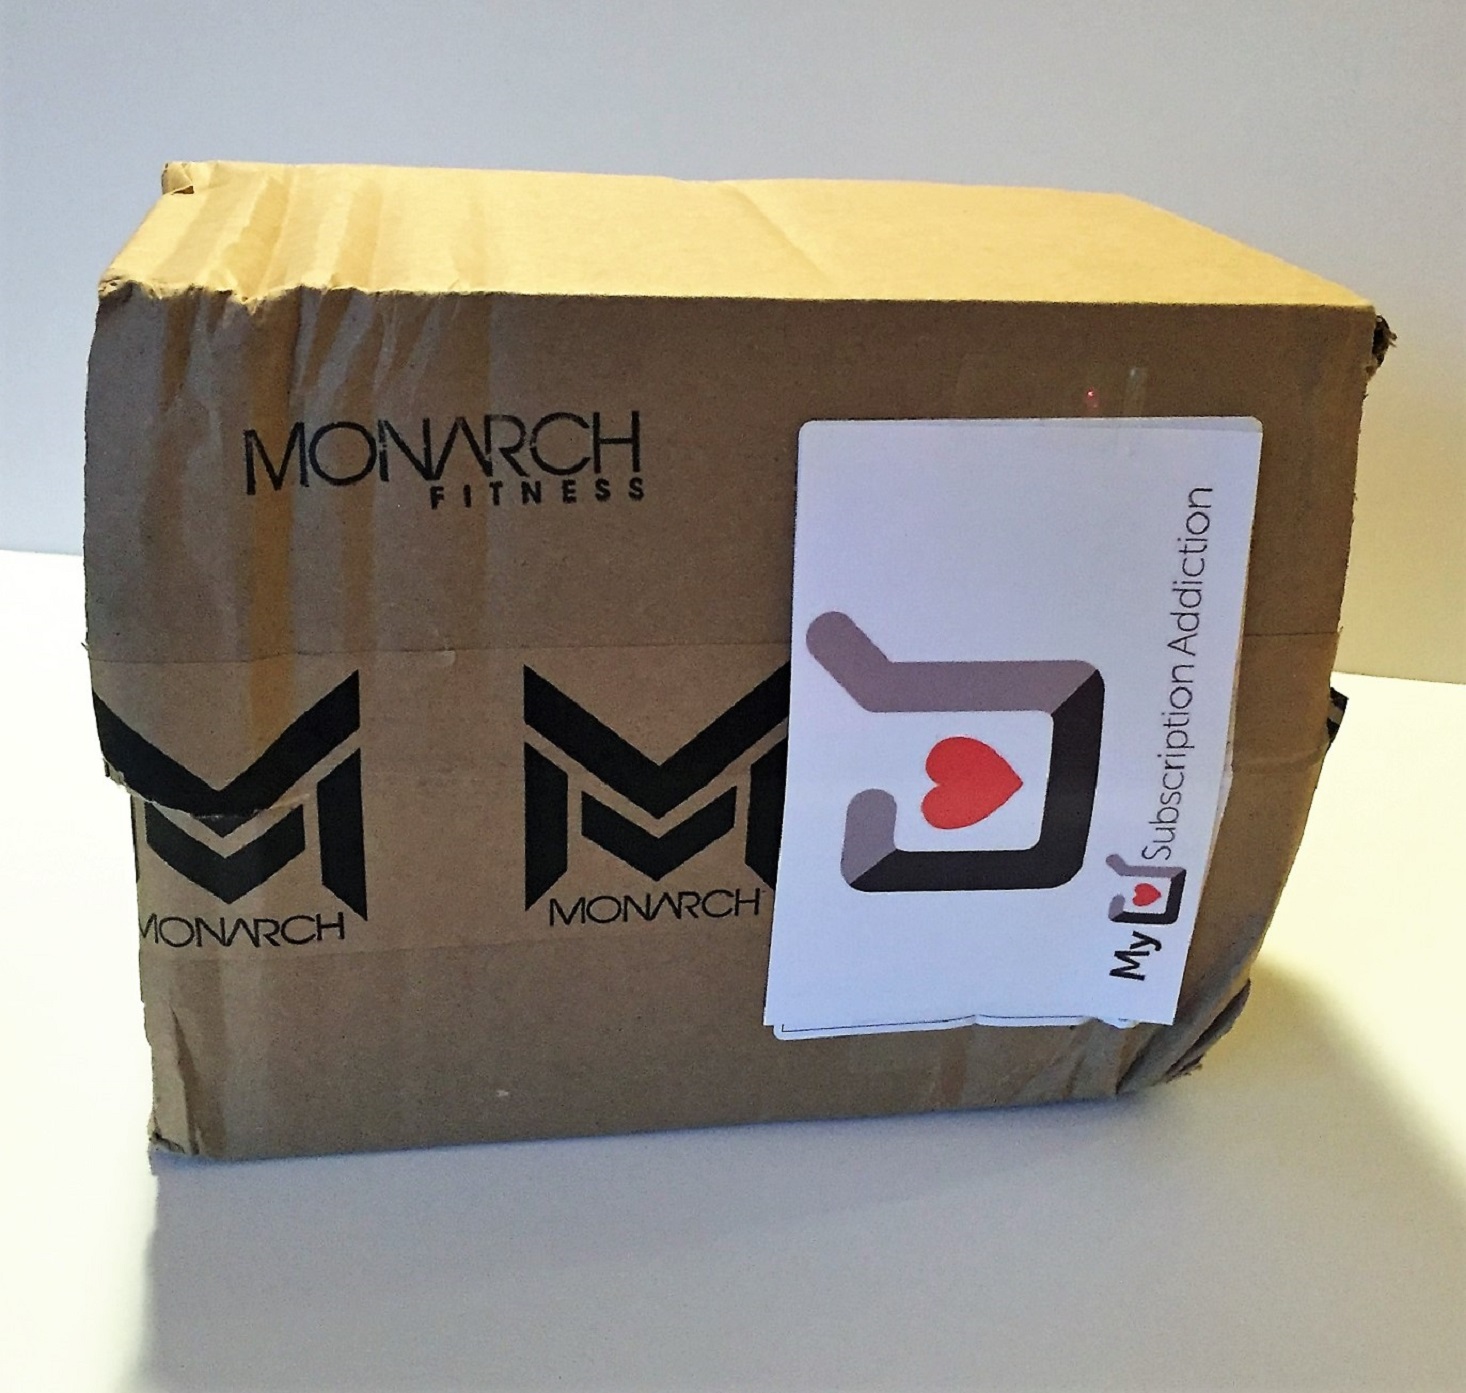 Monarch Fitness Basic Box Review + Coupon – September 2016